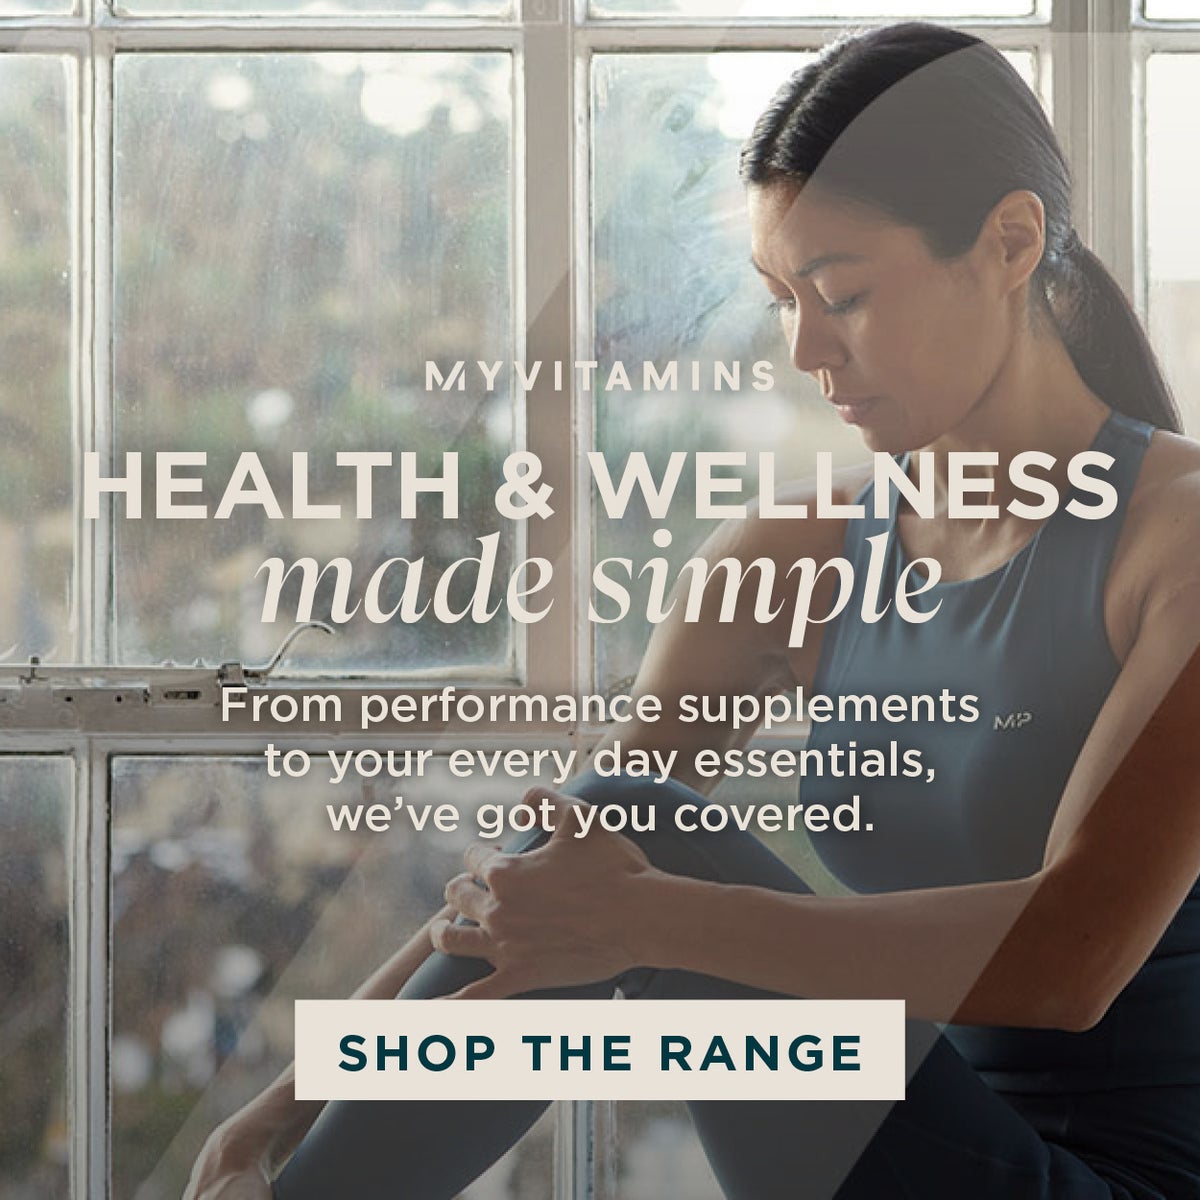 Health & wellness made simple. From performance supplements to your every day essentials, we've got you covered.